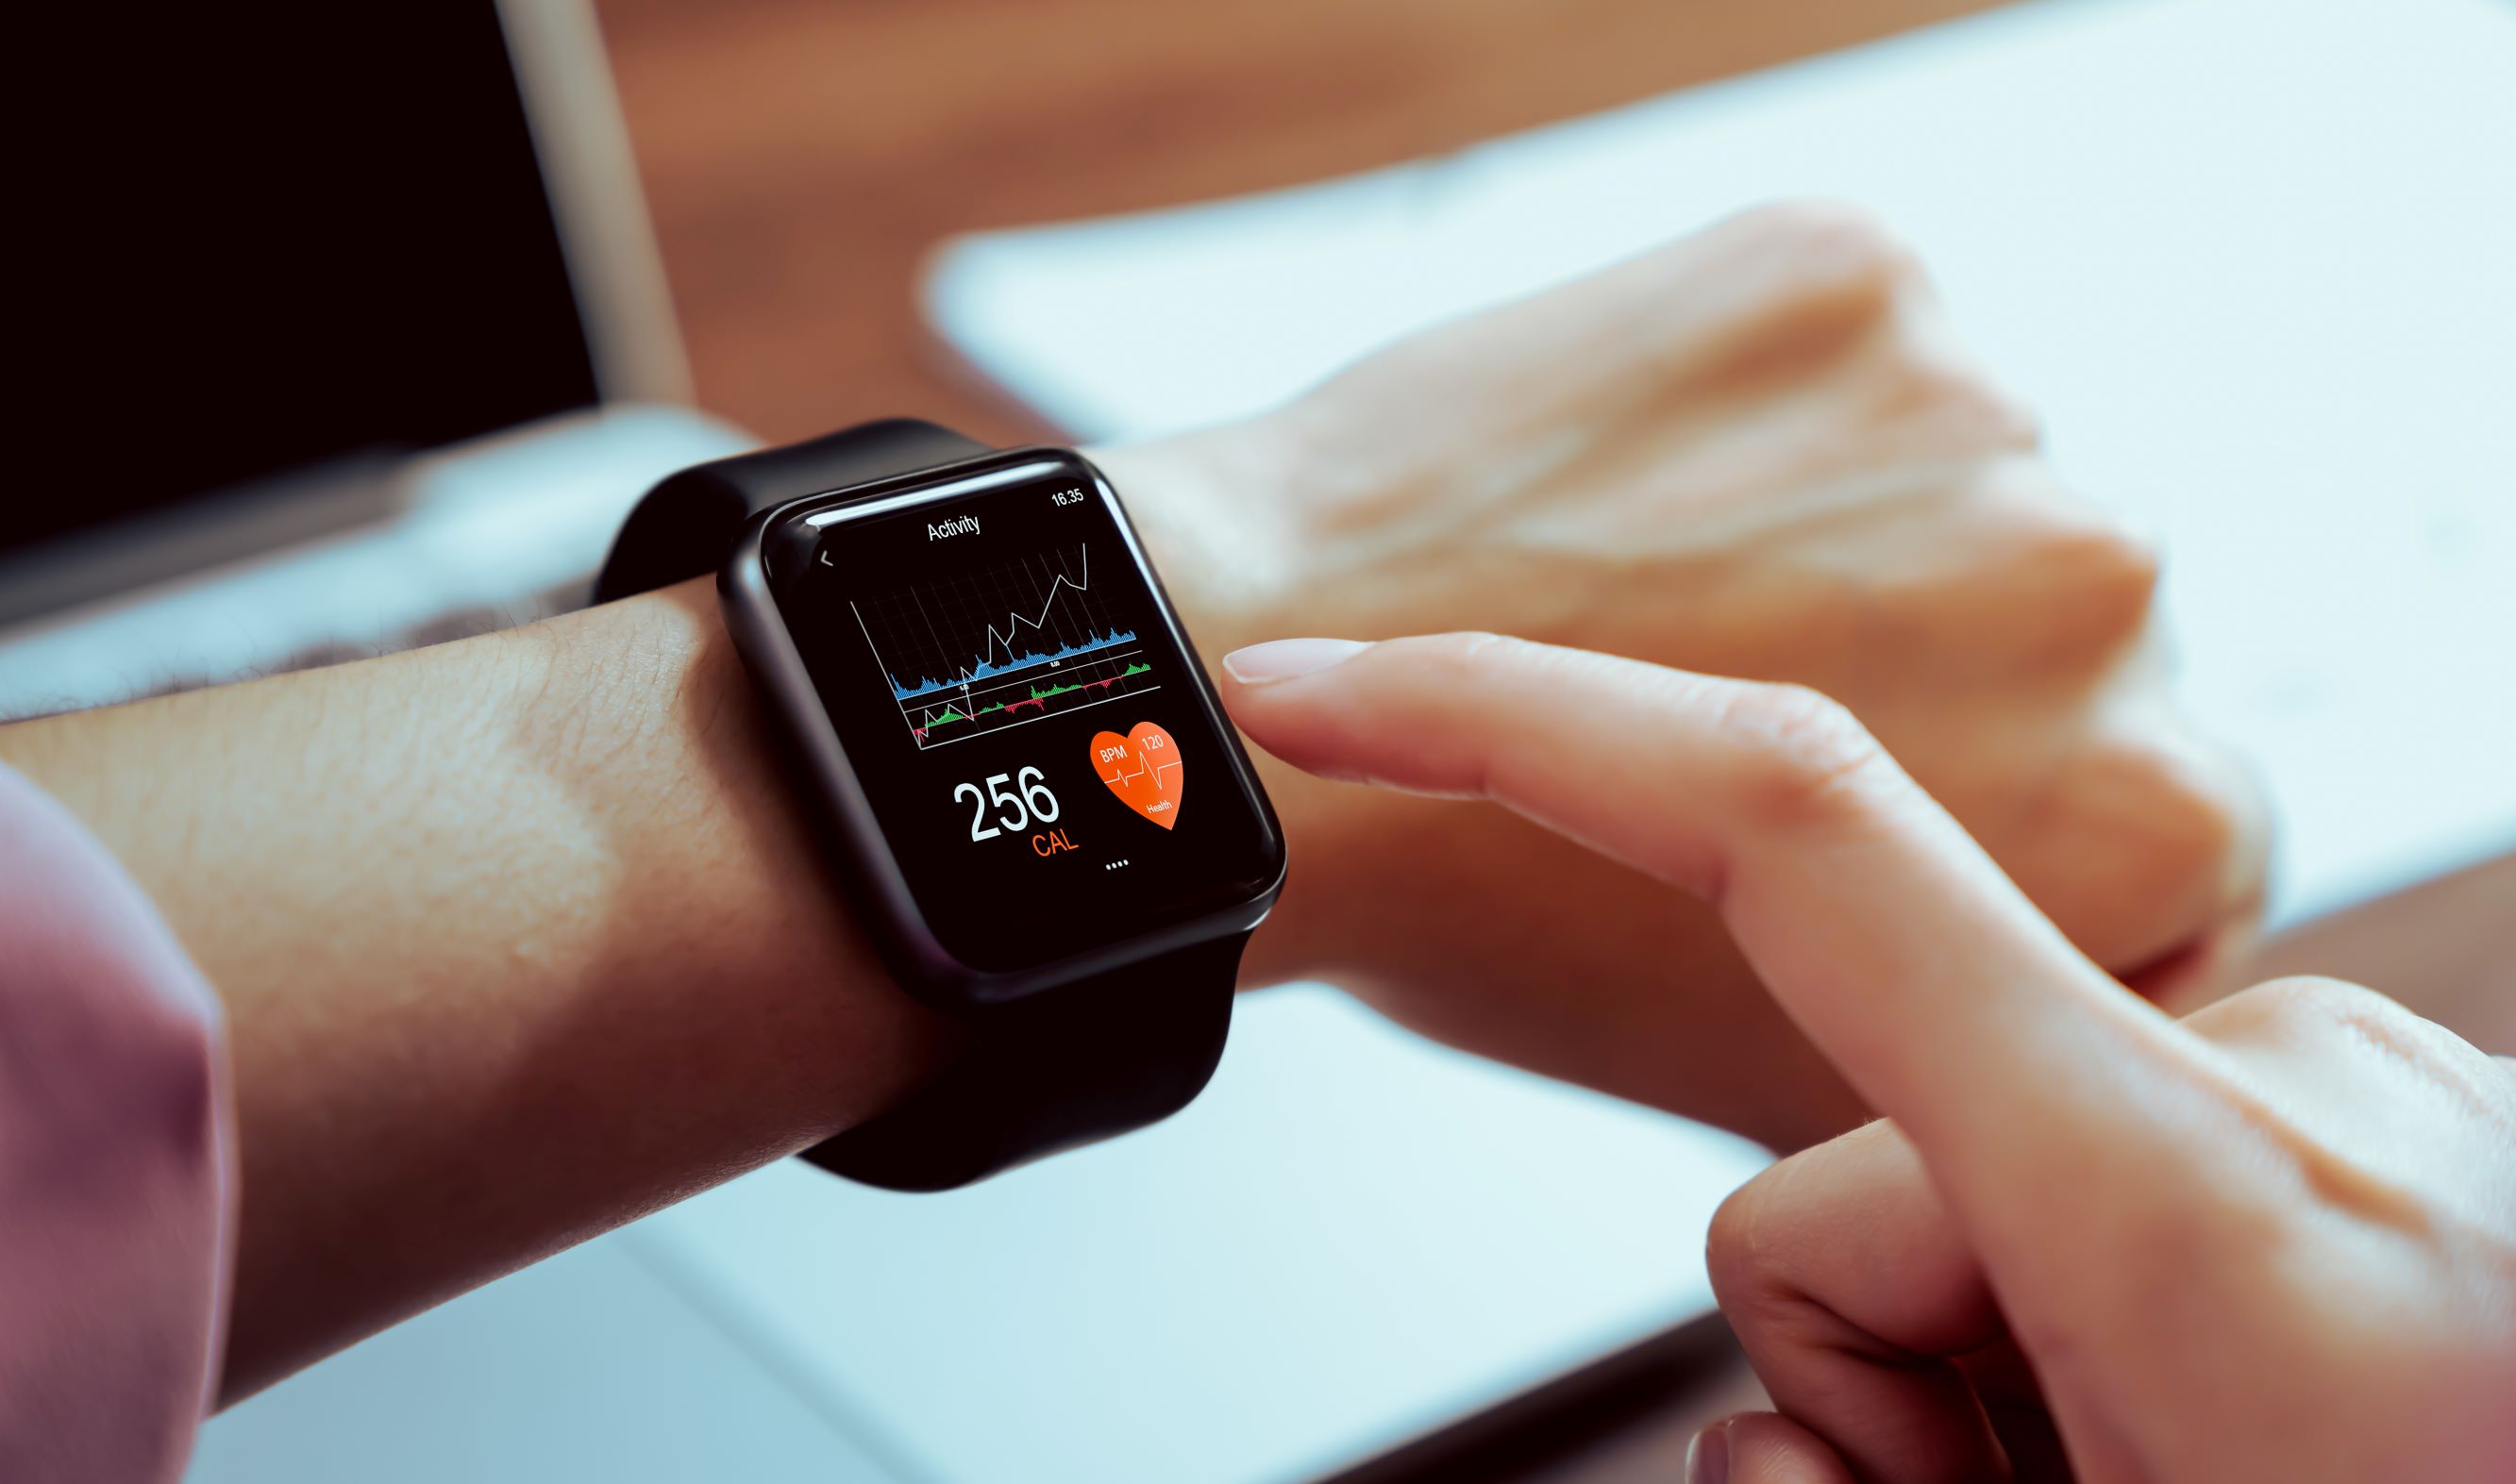 Smart wearables feature more health and safety applications Global